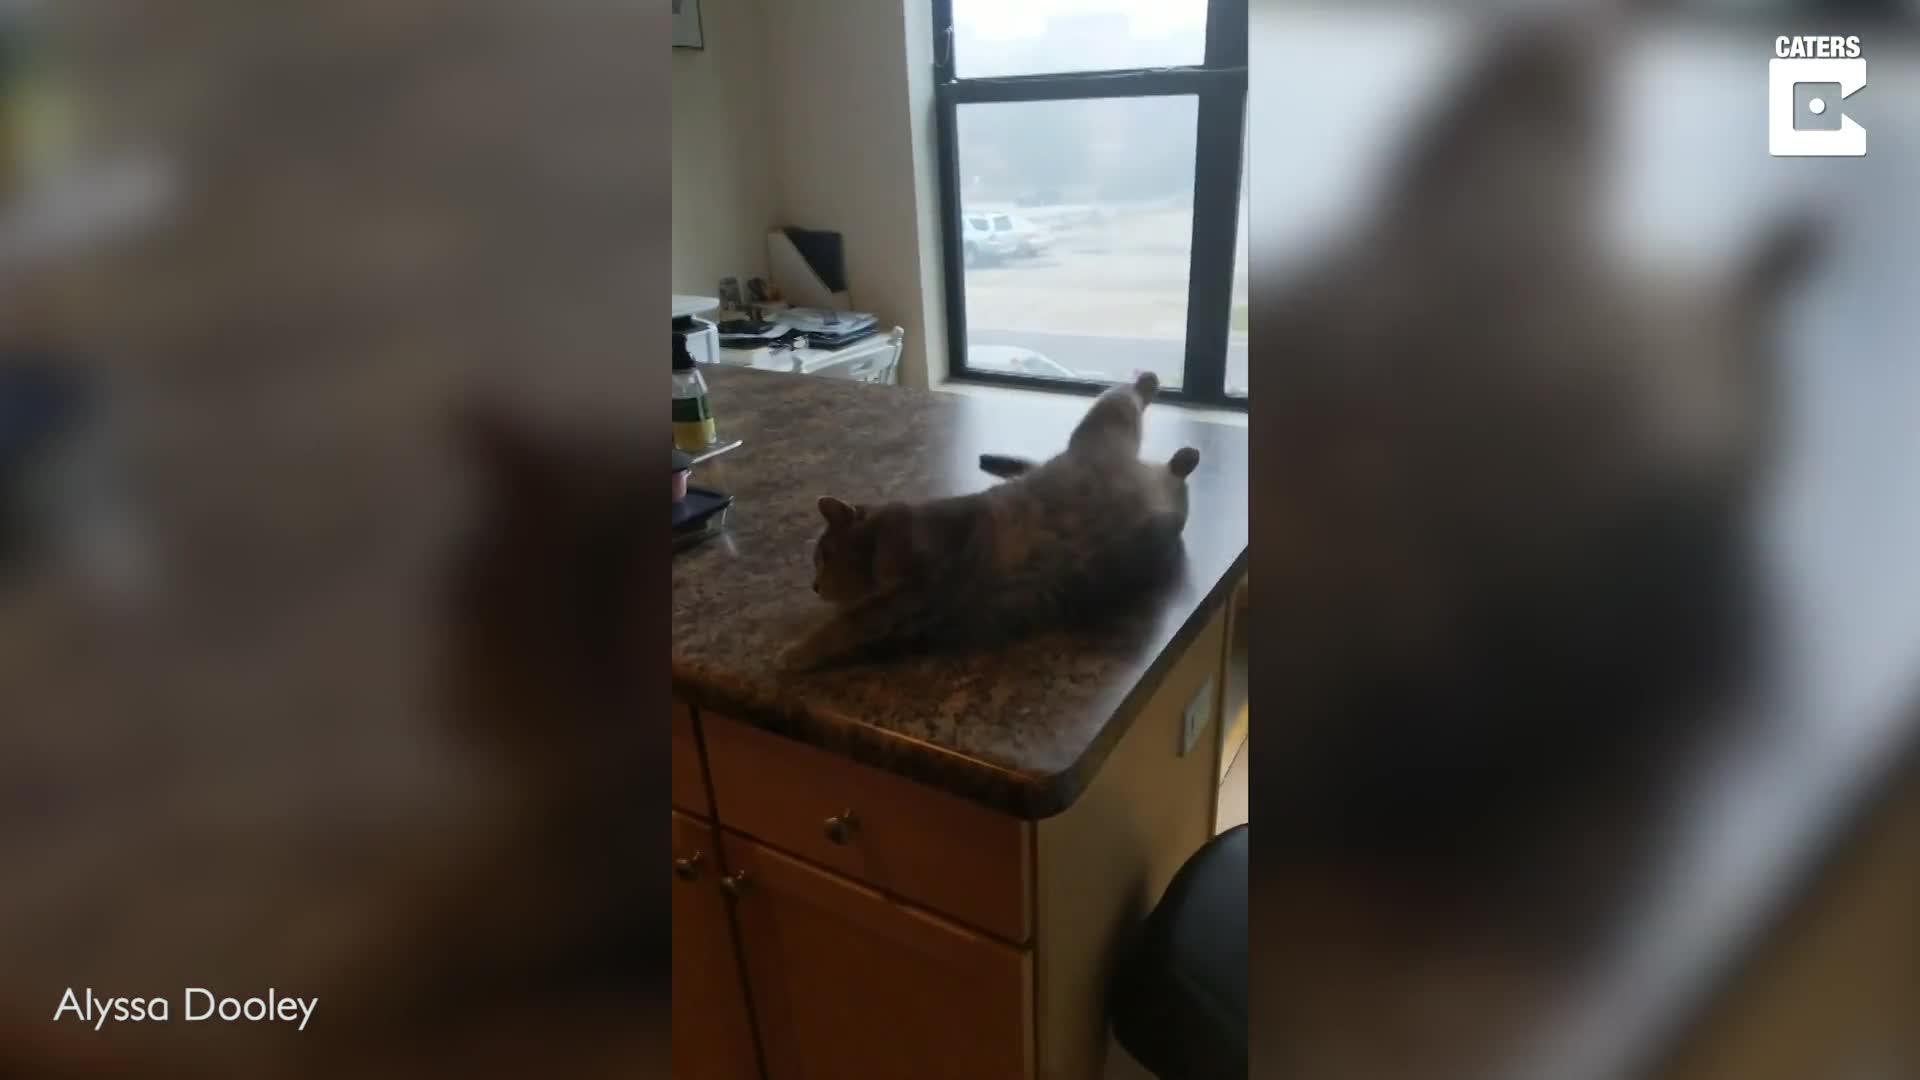 CAT DRAMATICALLY FALLS OFF KITCHEN COUNTER AFTER ROLLING AT SOUND OF OWN NAME